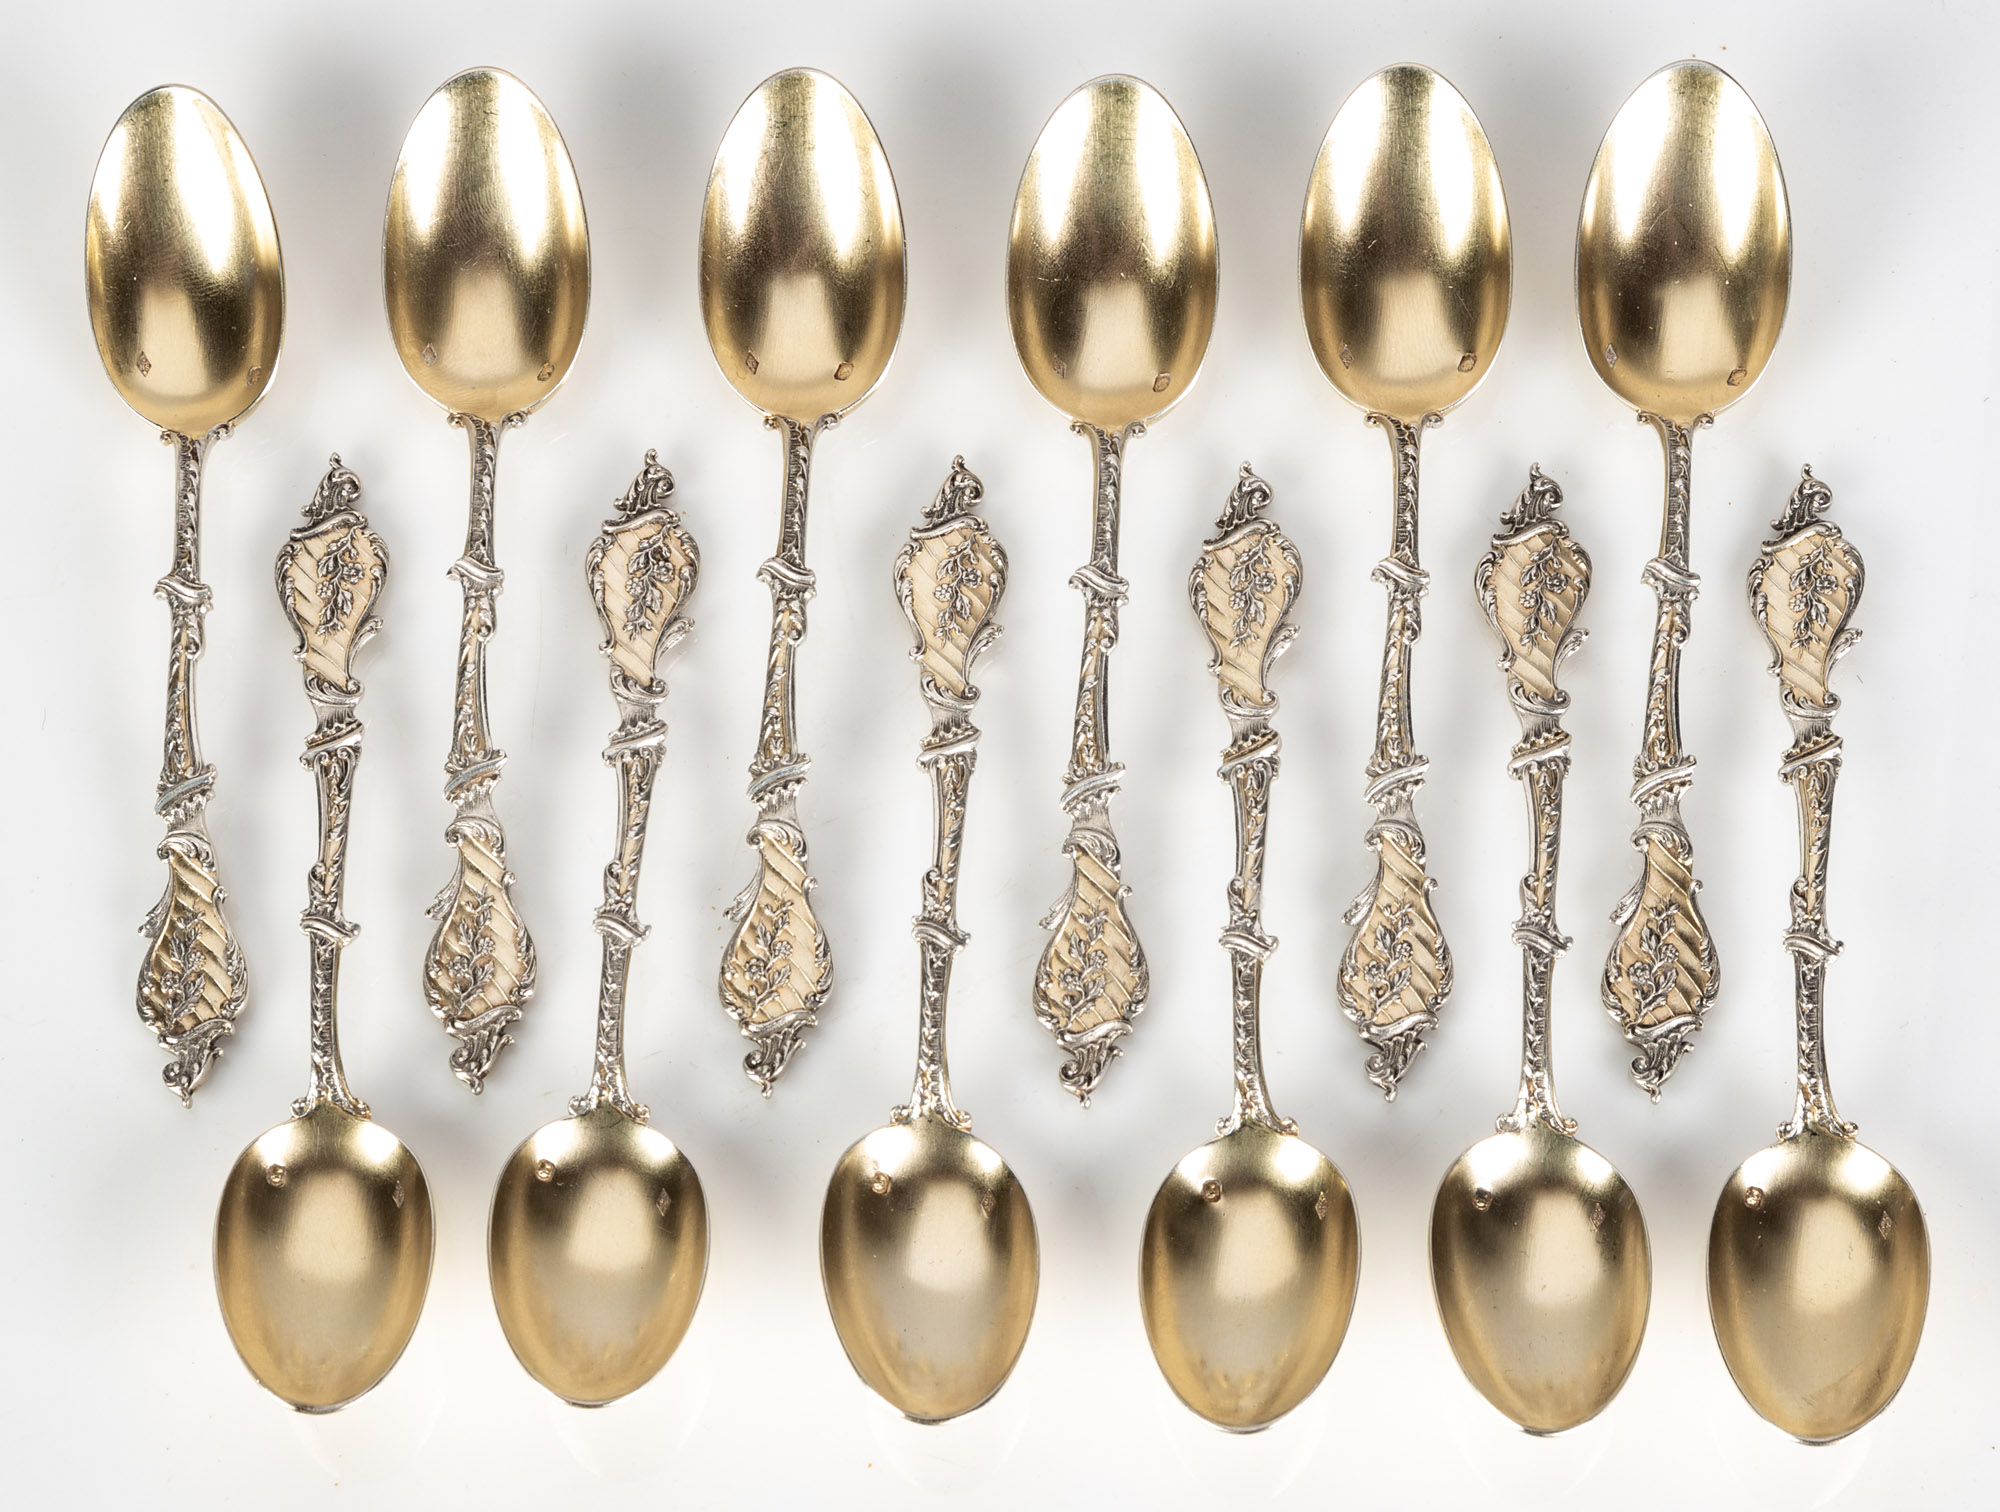  12 FRENCH SILVER GILT SPOONS 28bc8d